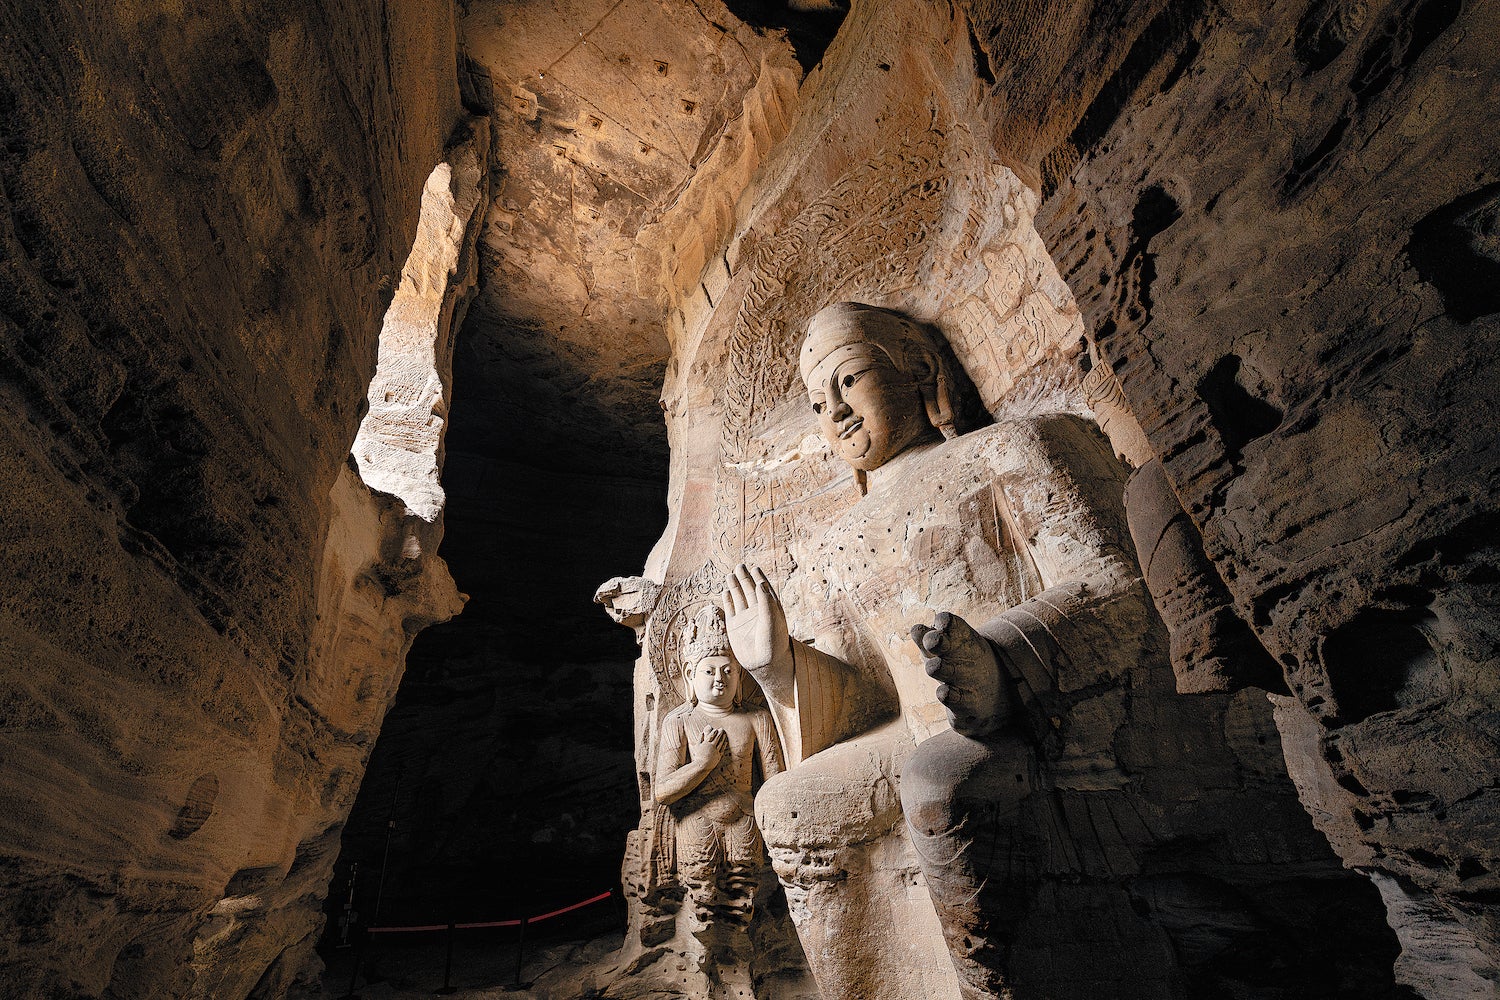 Cave 3 of the Yungang Grottoes features typical artistic elements from the early period of the Northern Wei Dynasty (386-534)